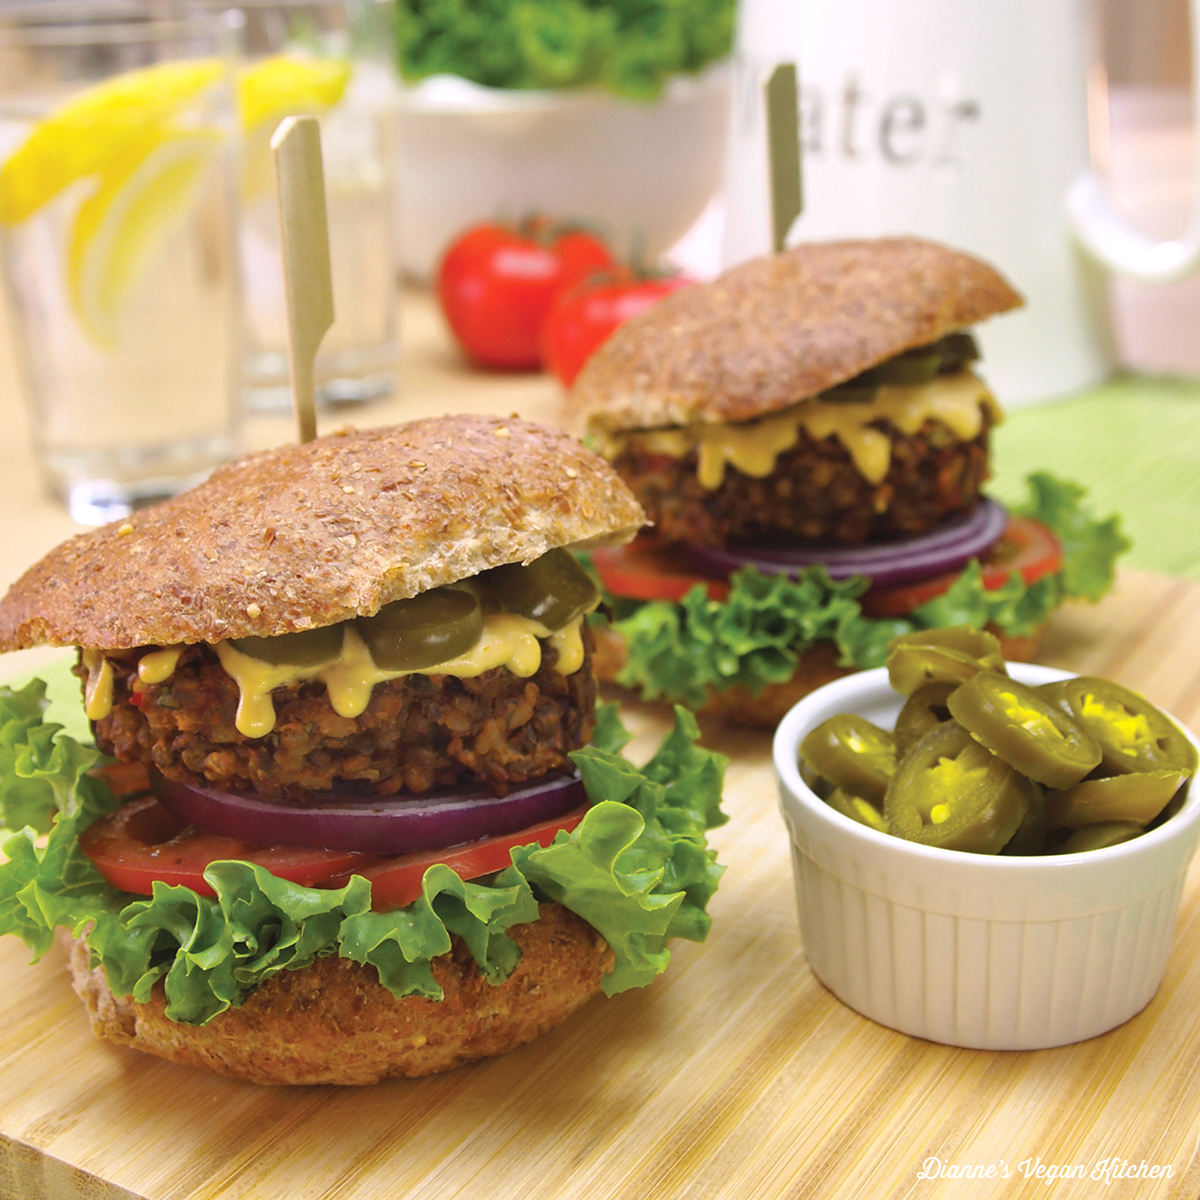 Chipotle Lentil Burgers from What's for Lunch? by Dianne Wenz